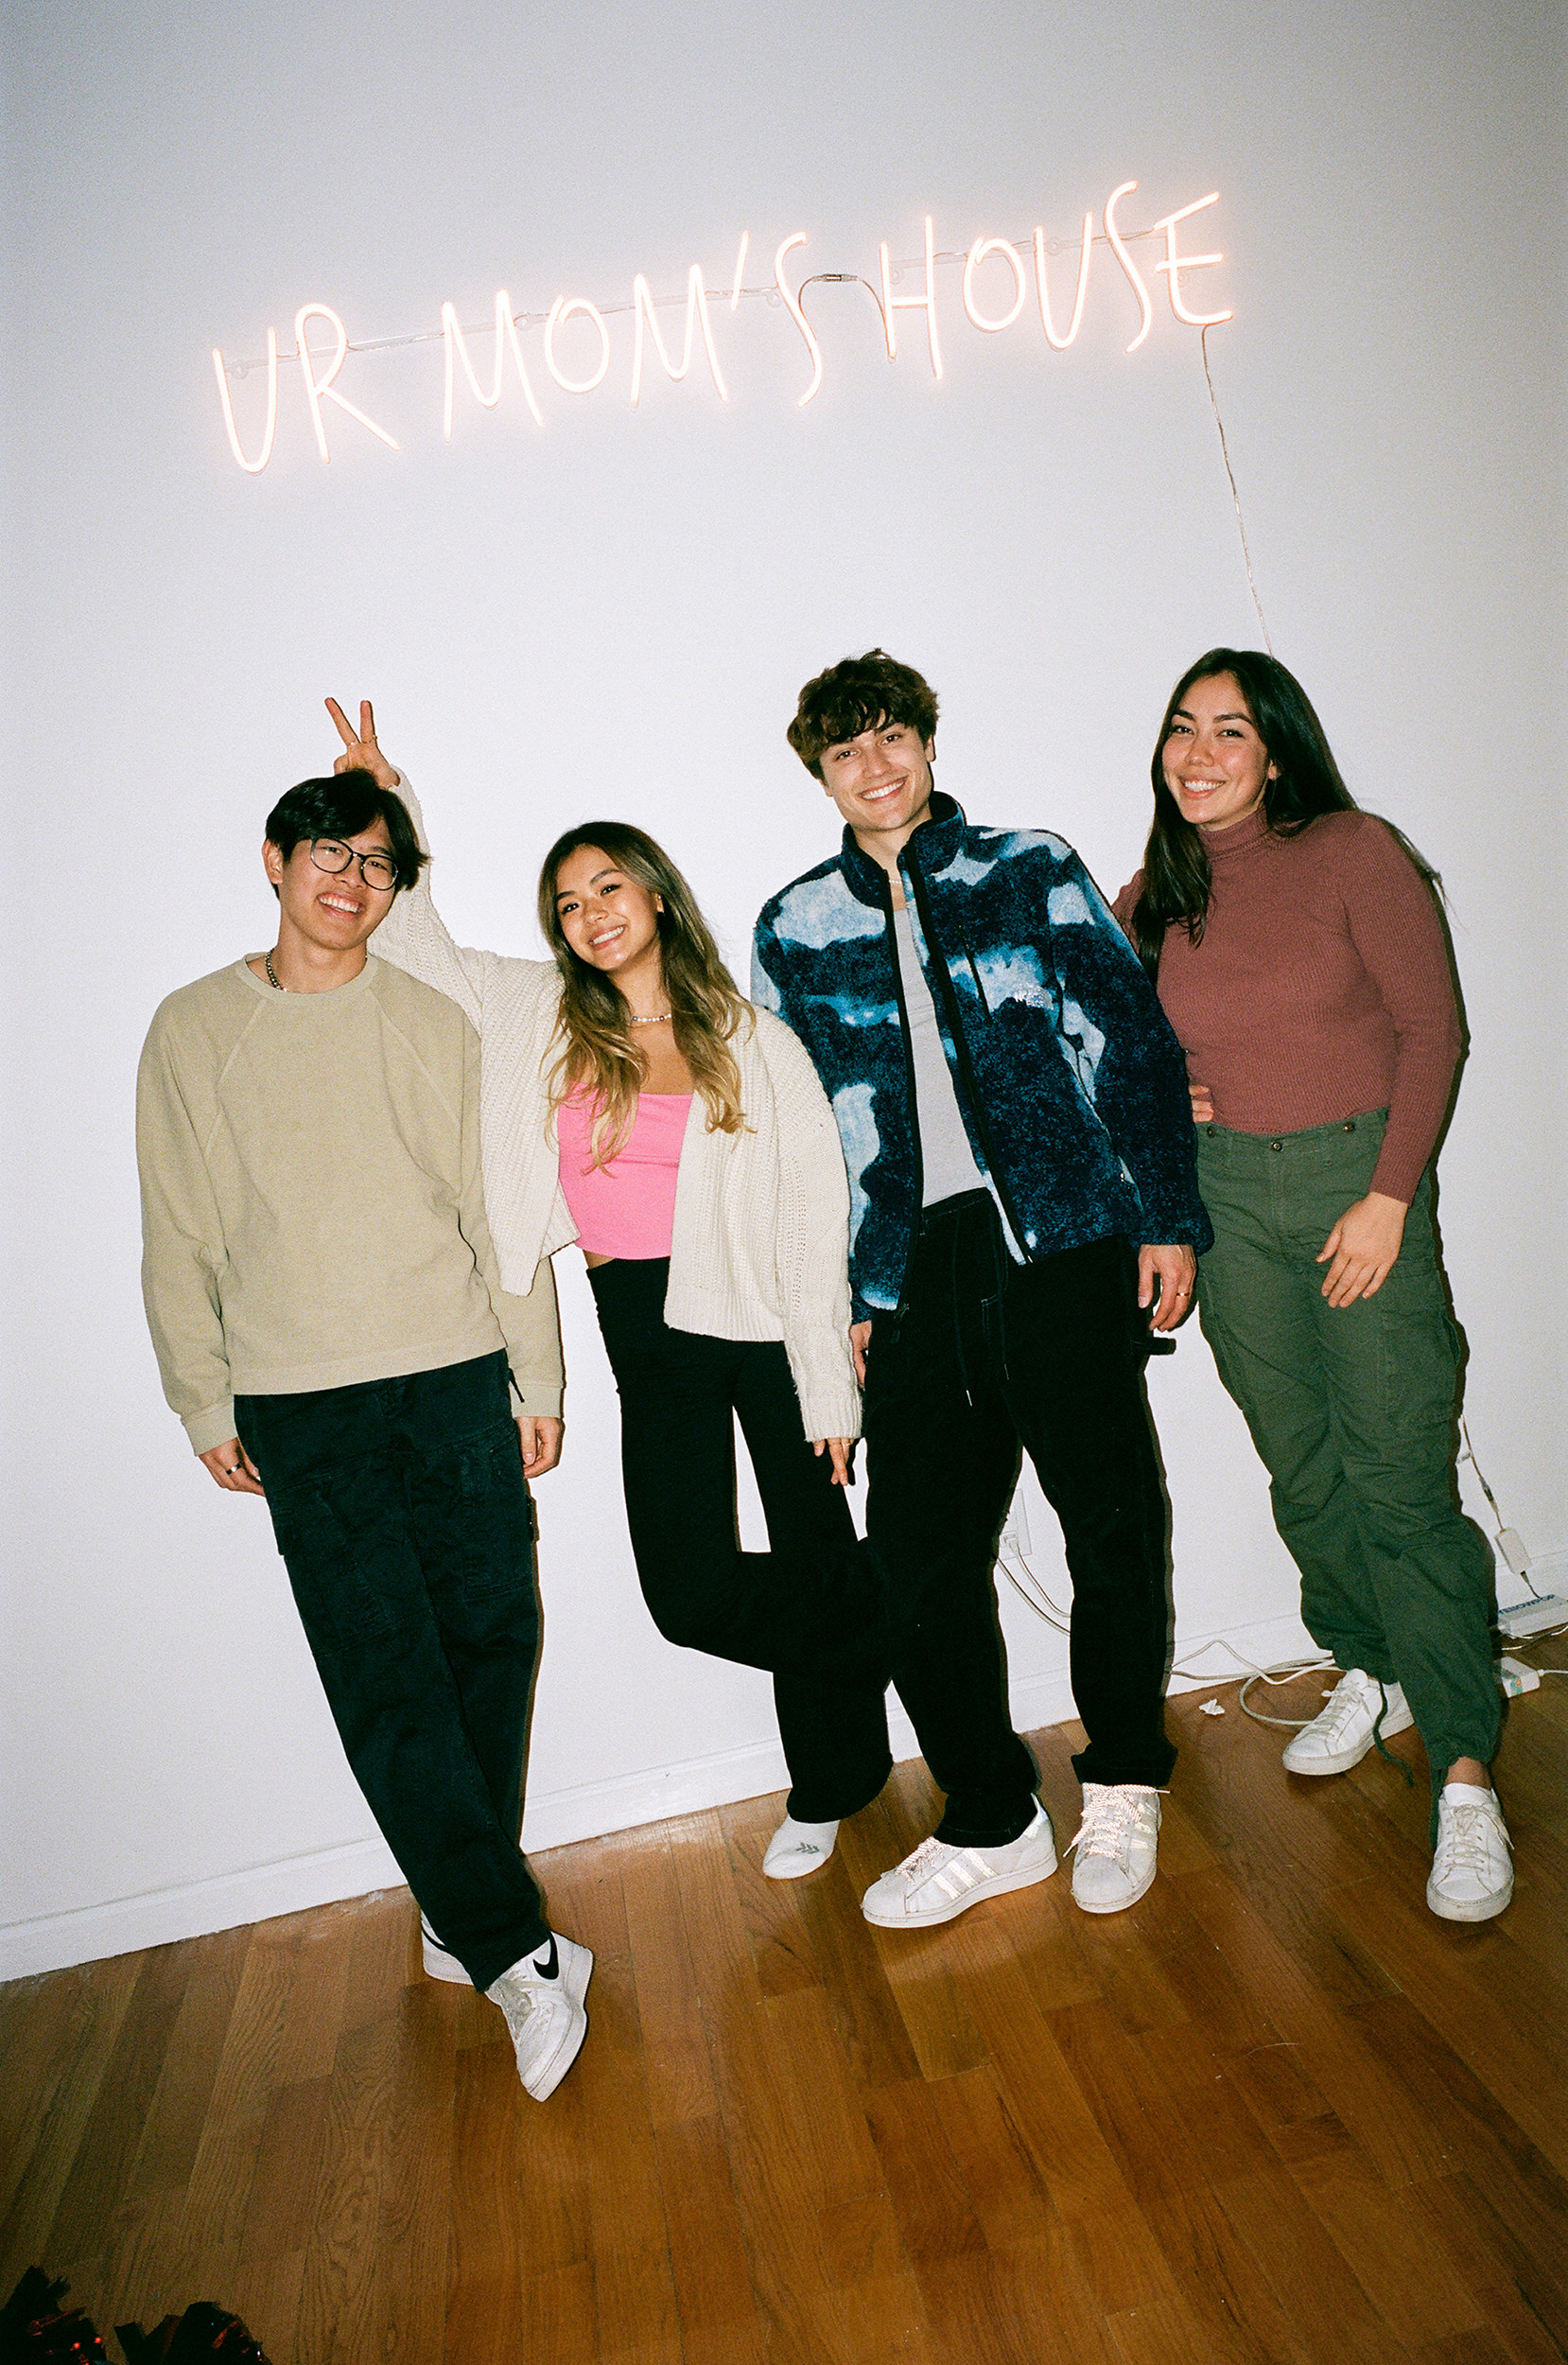 Four smiling people dressed casually stand together on a wood floor, with &quot;Ur Mom&#x27;s House&quot; in lights above them